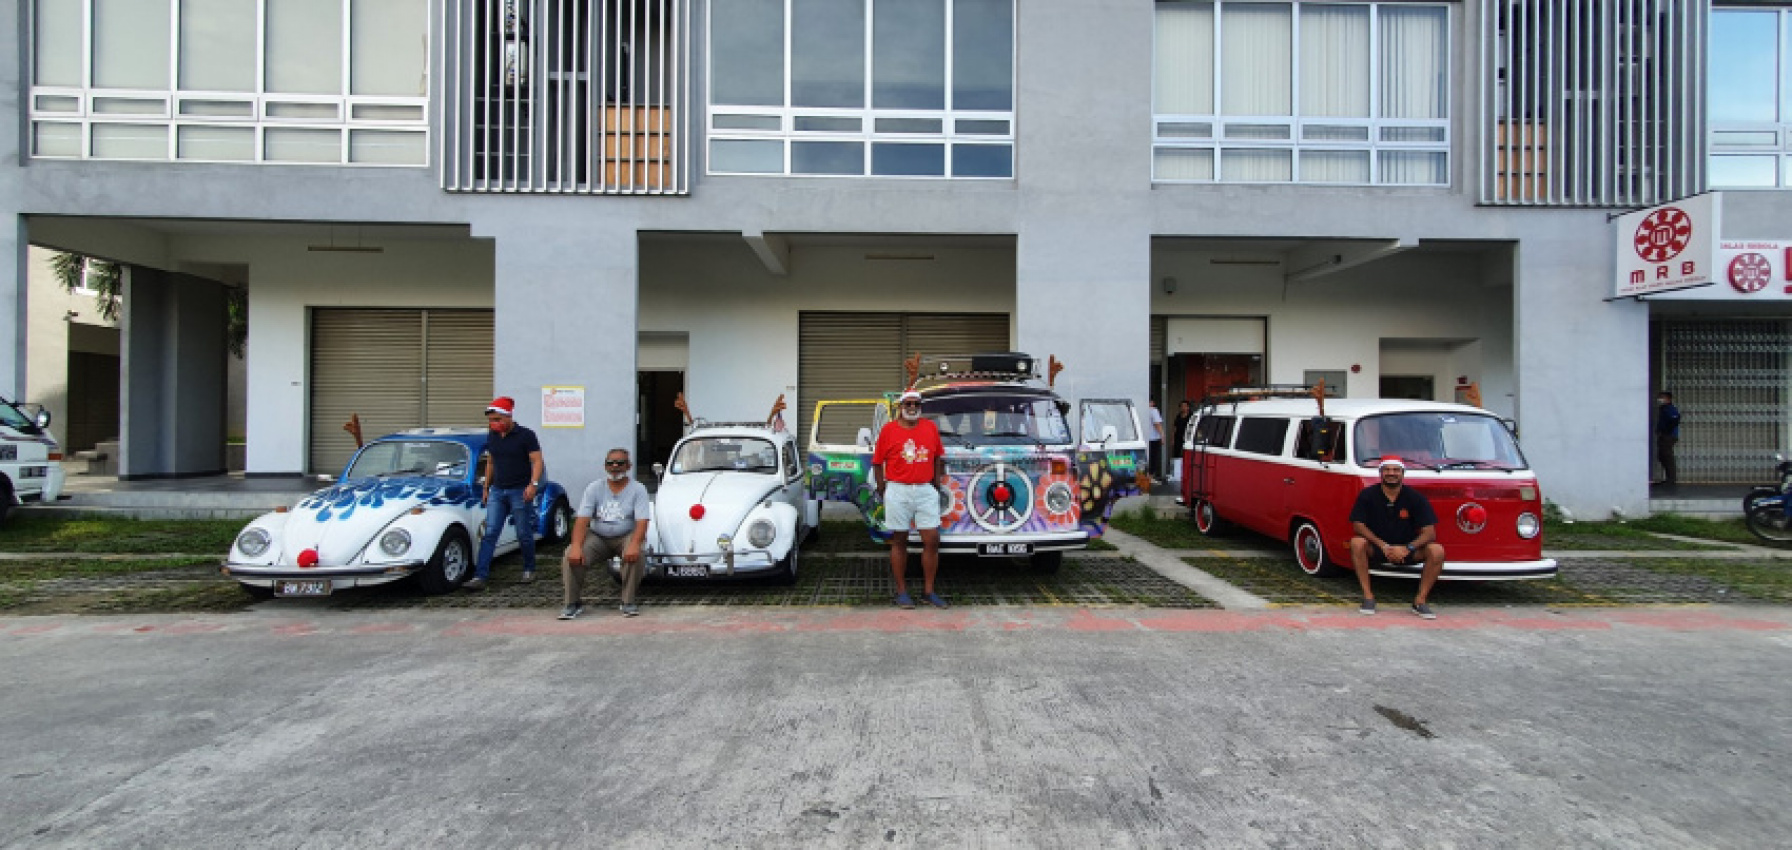 autos, cars, volkswagen, pichaeats, vw drive for kindness, volkswagen joins pichaeats to feed the less fortunate